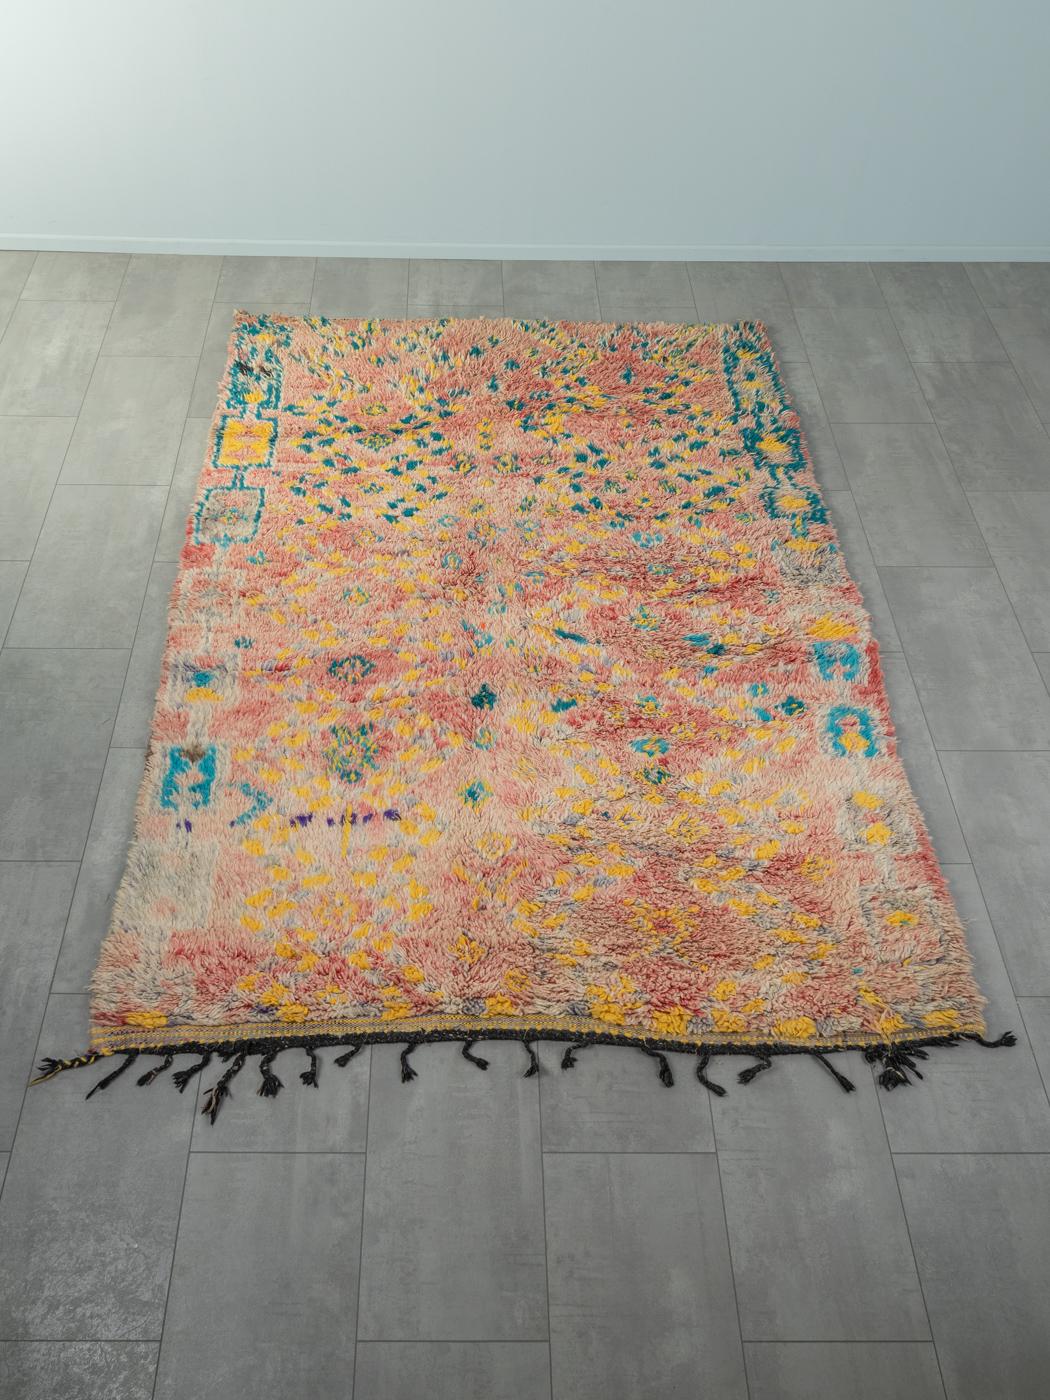 This Vintage Beni Mguild is a 100 % wool rug – soft and comfortable underfoot. Our Berber rugs are handmade, one knot at a time. Each of our Berber rugs is a long-lasting one-of-a-kind piece, created in a sustainable manner with local